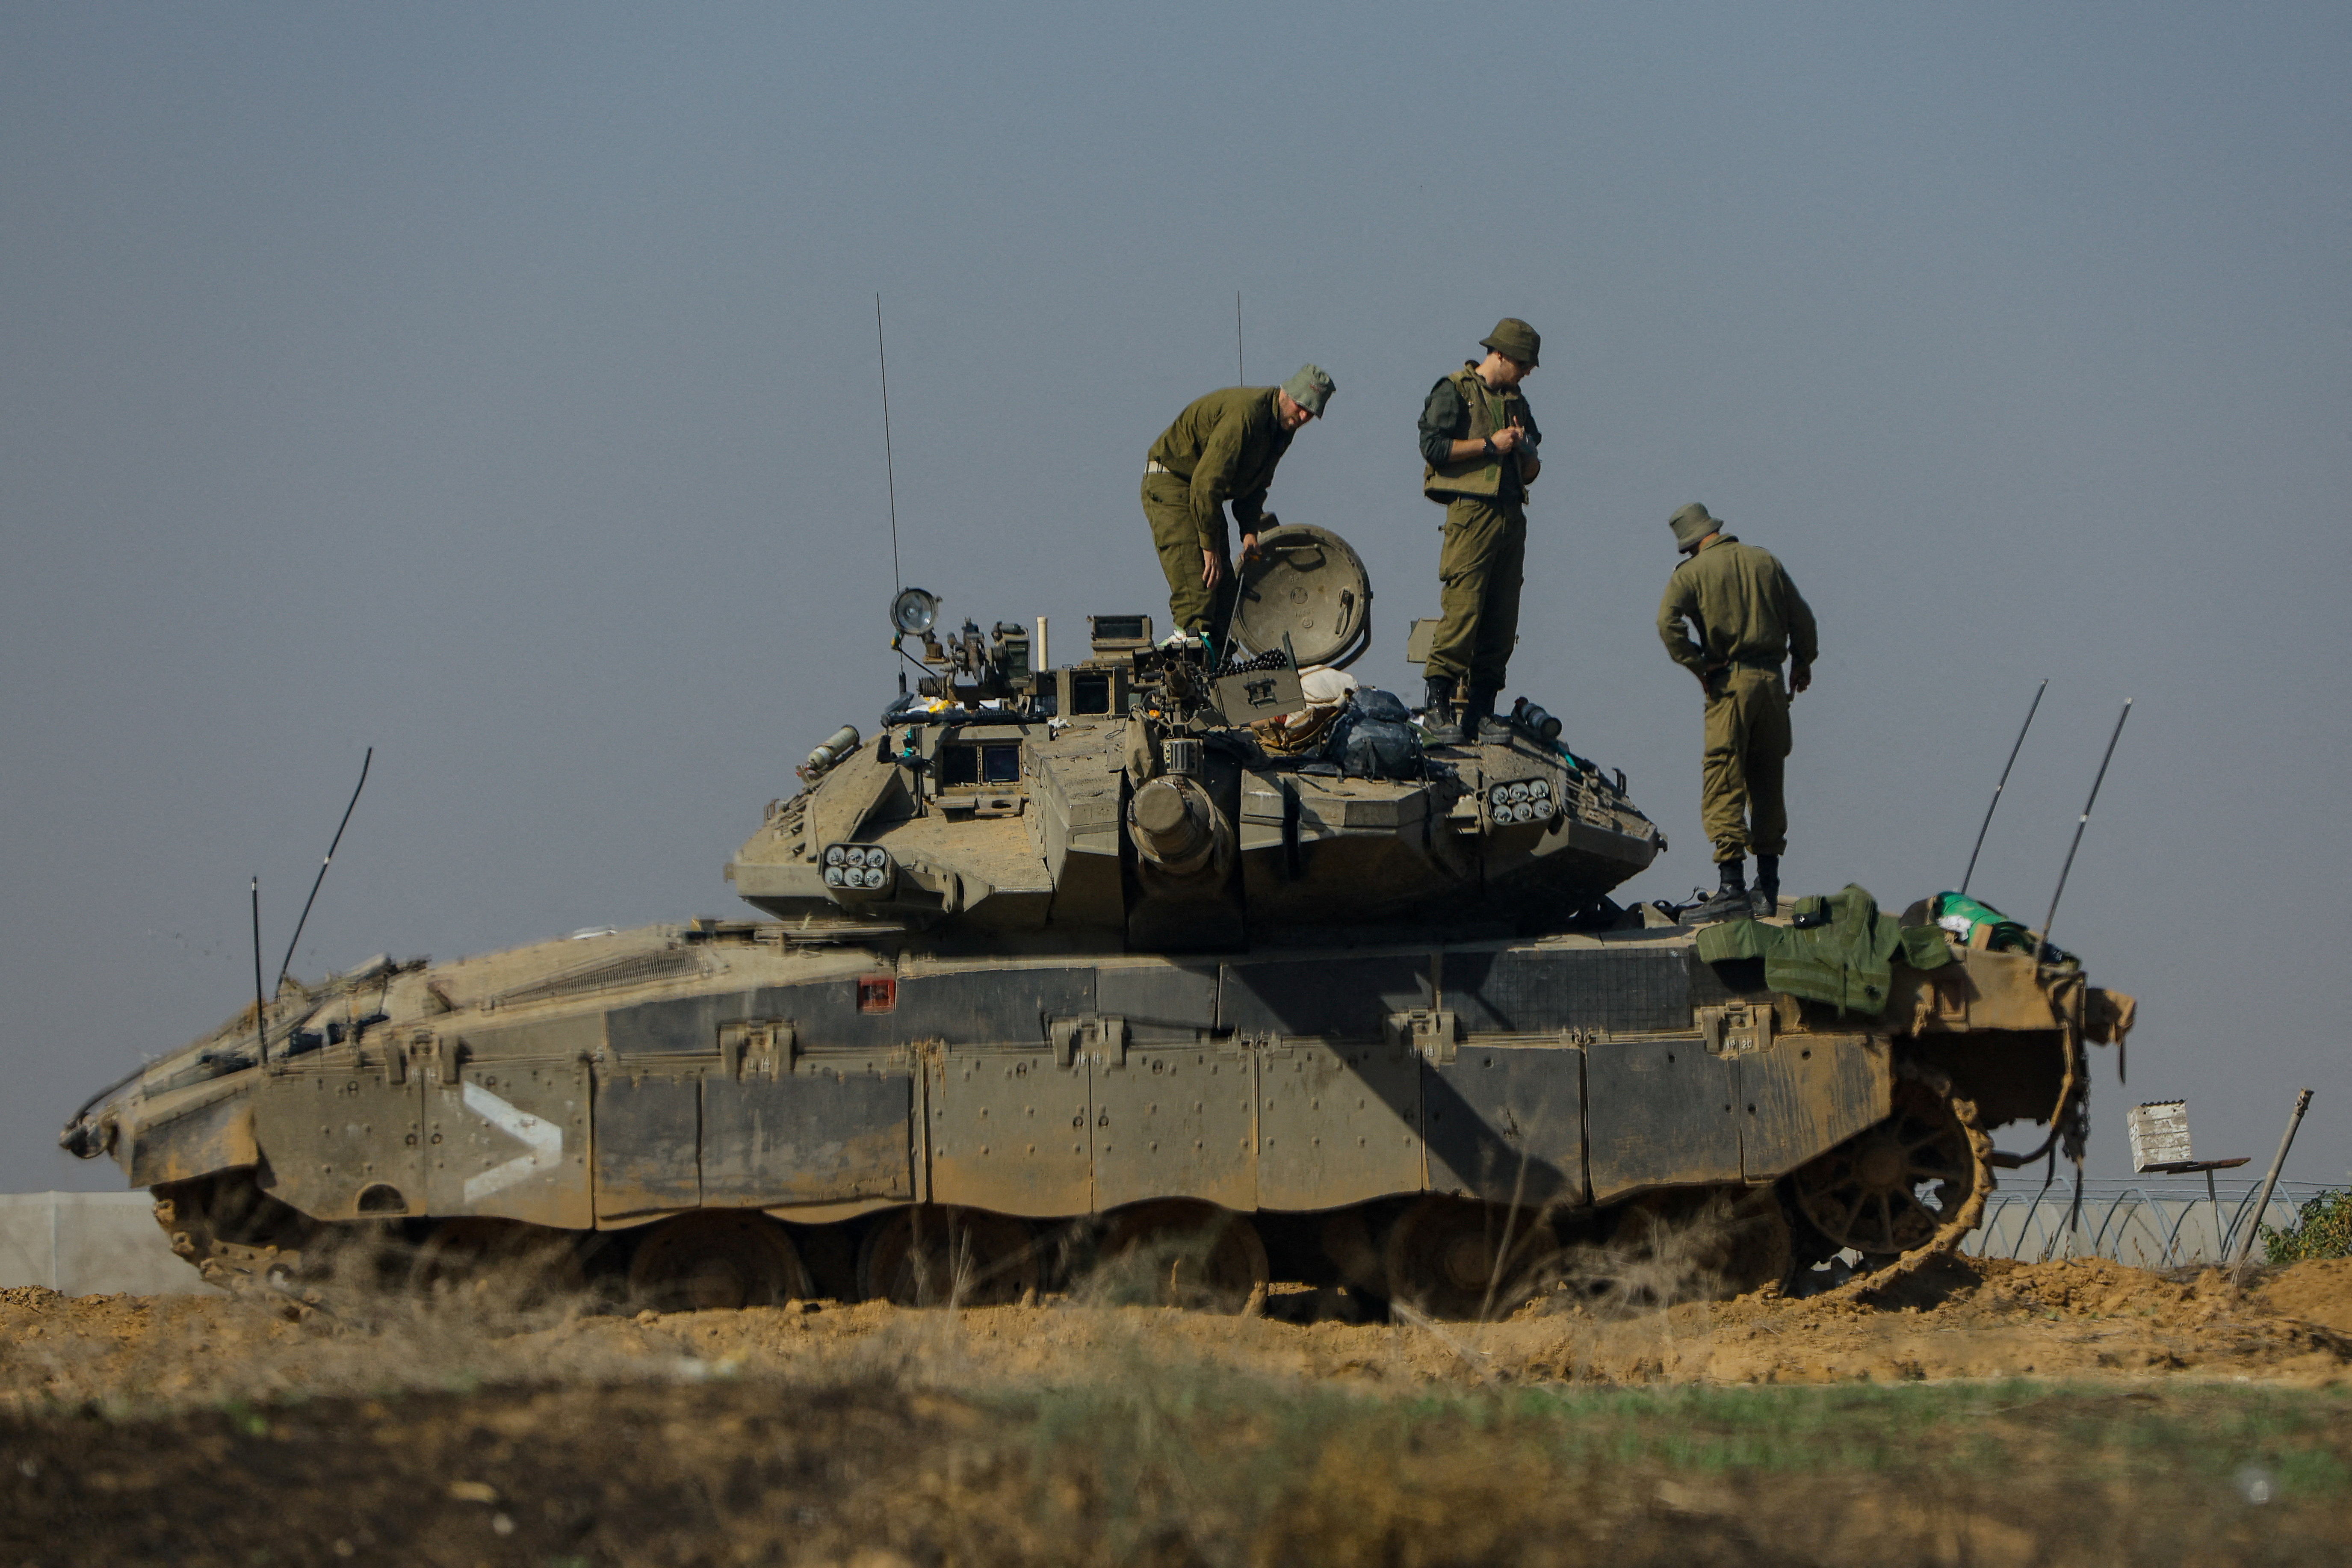 Israeli soldiers work on a tank near the border with Gaza, amid the ongoing conflict between Israel and the Palestinian Islamist group Hamas